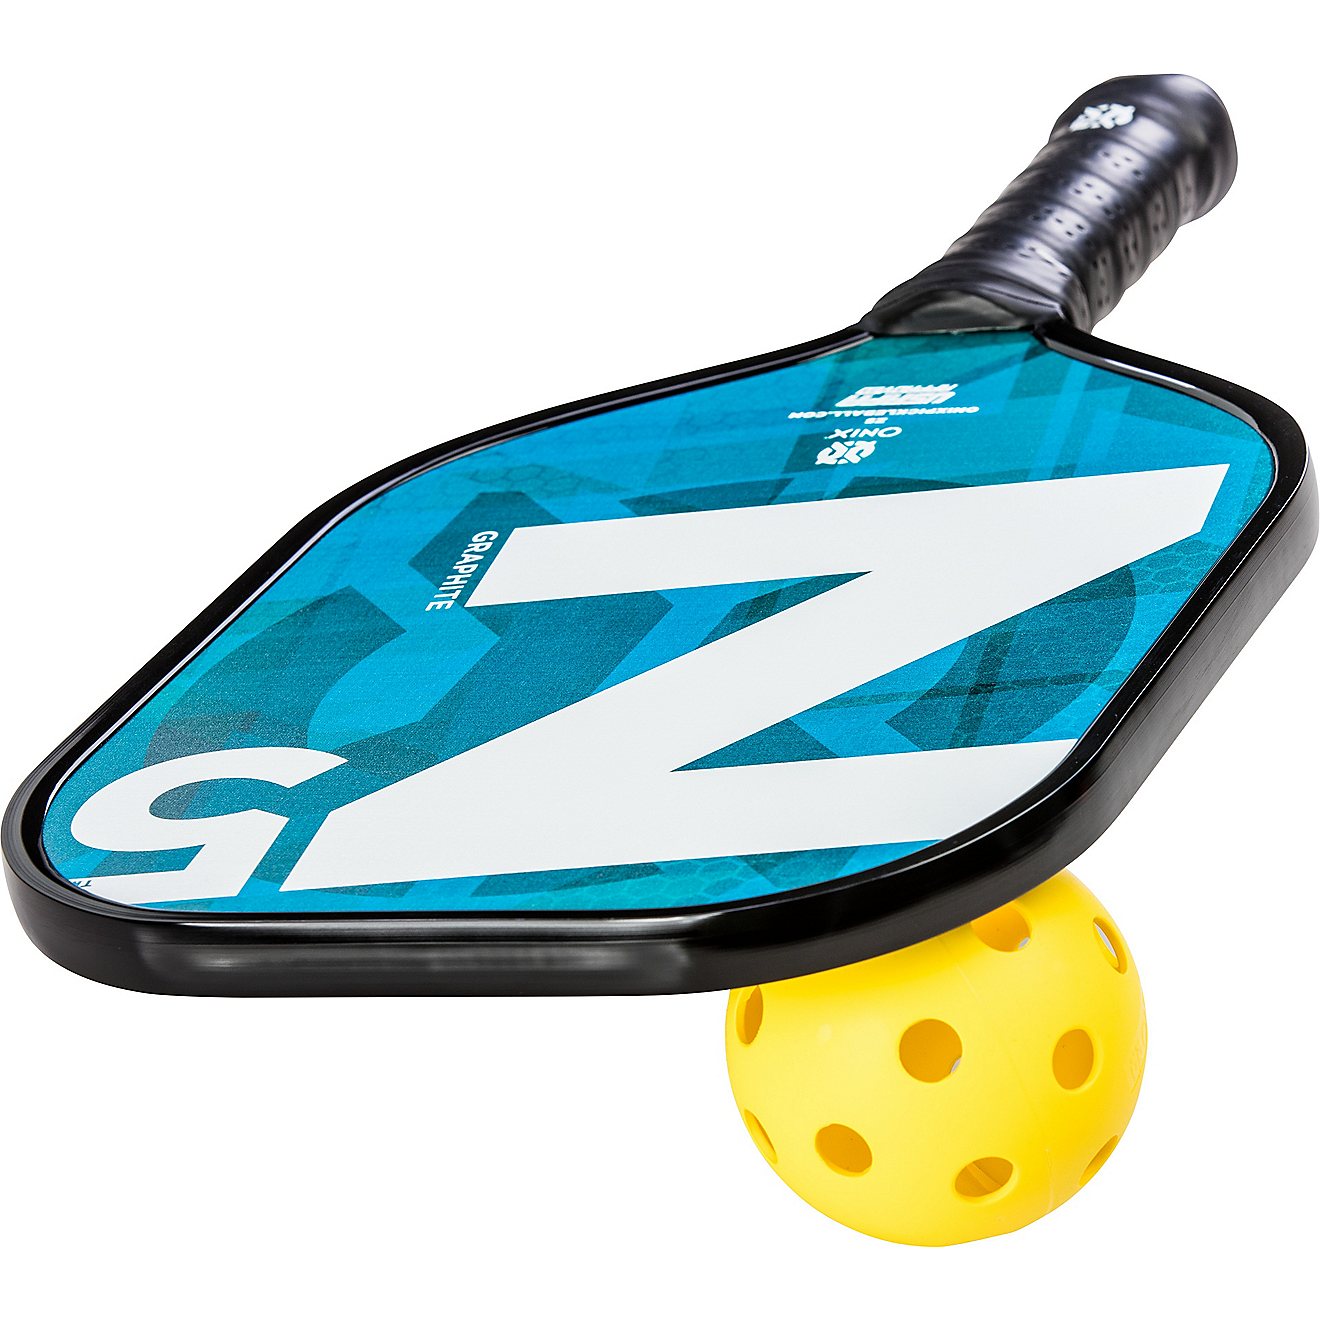 Onix Z5 Graphite Pickleball Paddle                                                                                               - view number 3